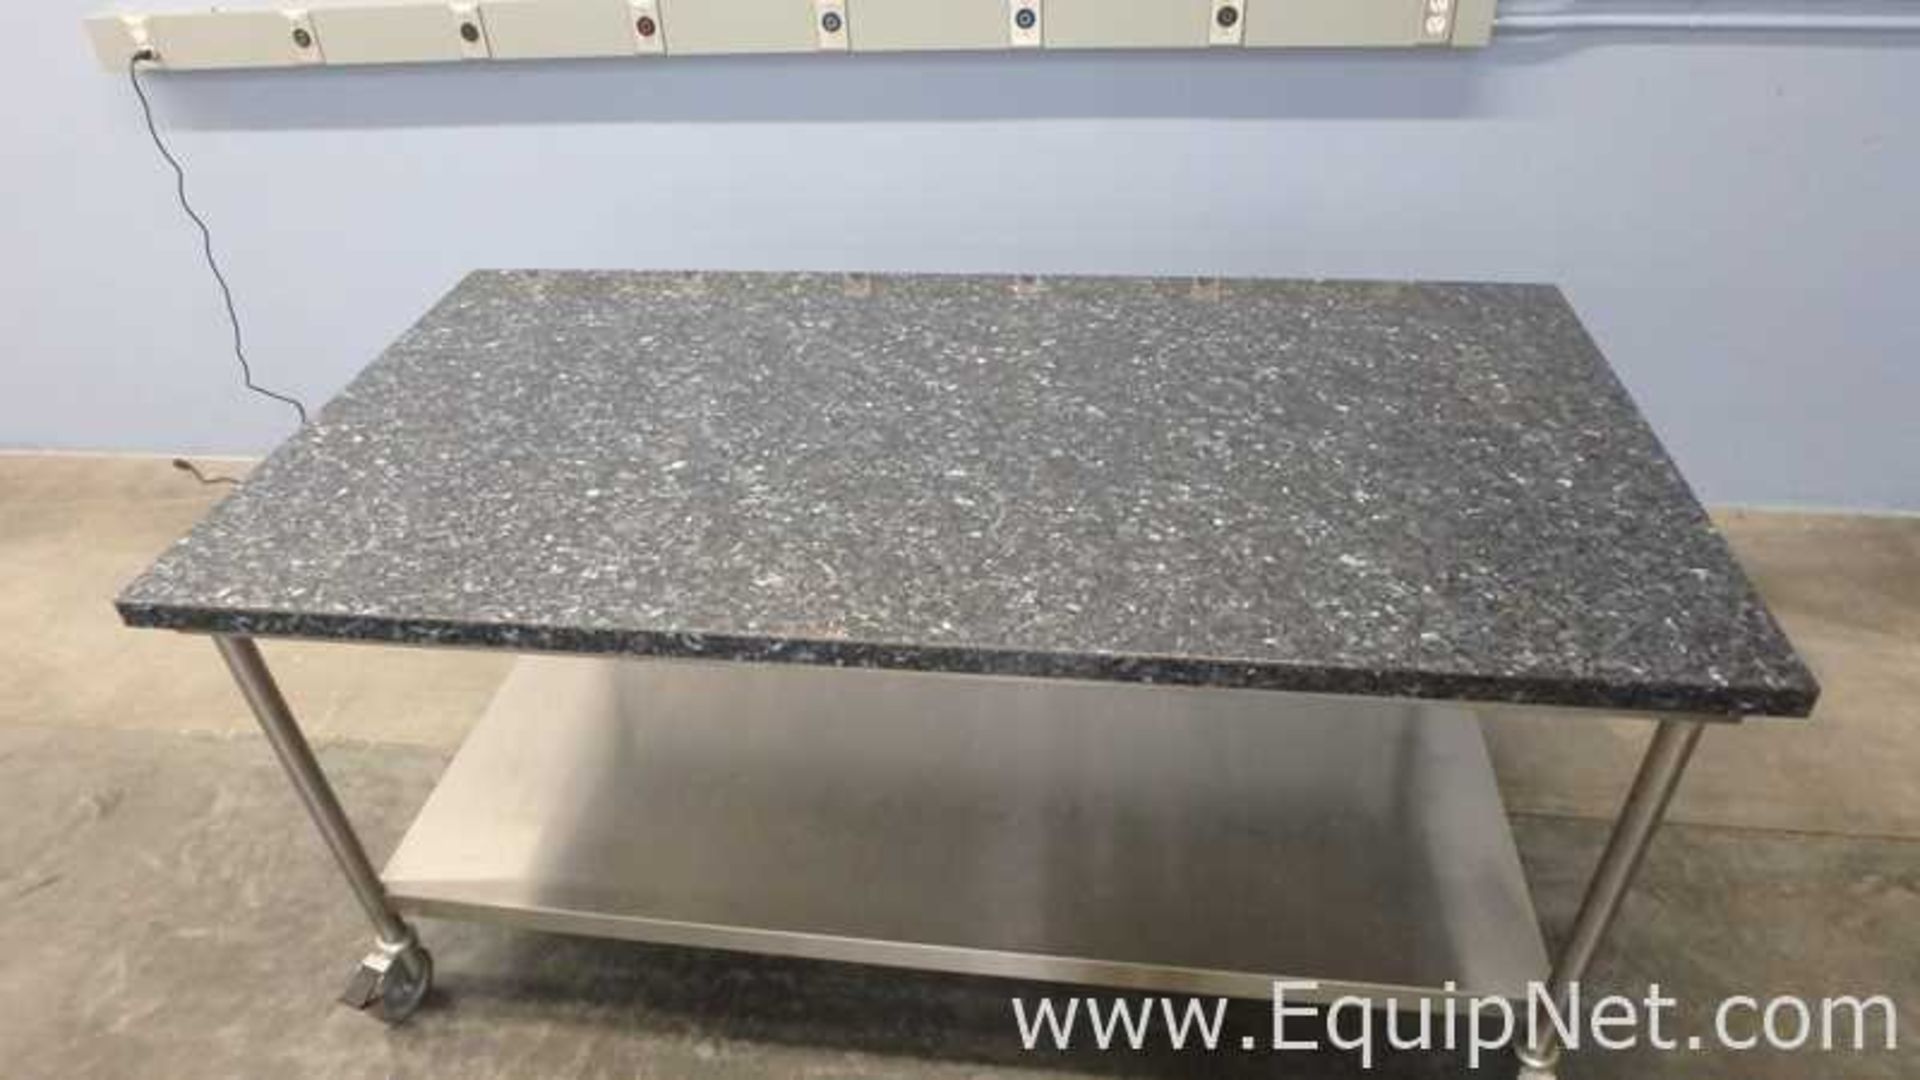 Lot of 3 Granite Top Stainless Steel Work Tables 75in x 39in - Image 3 of 9